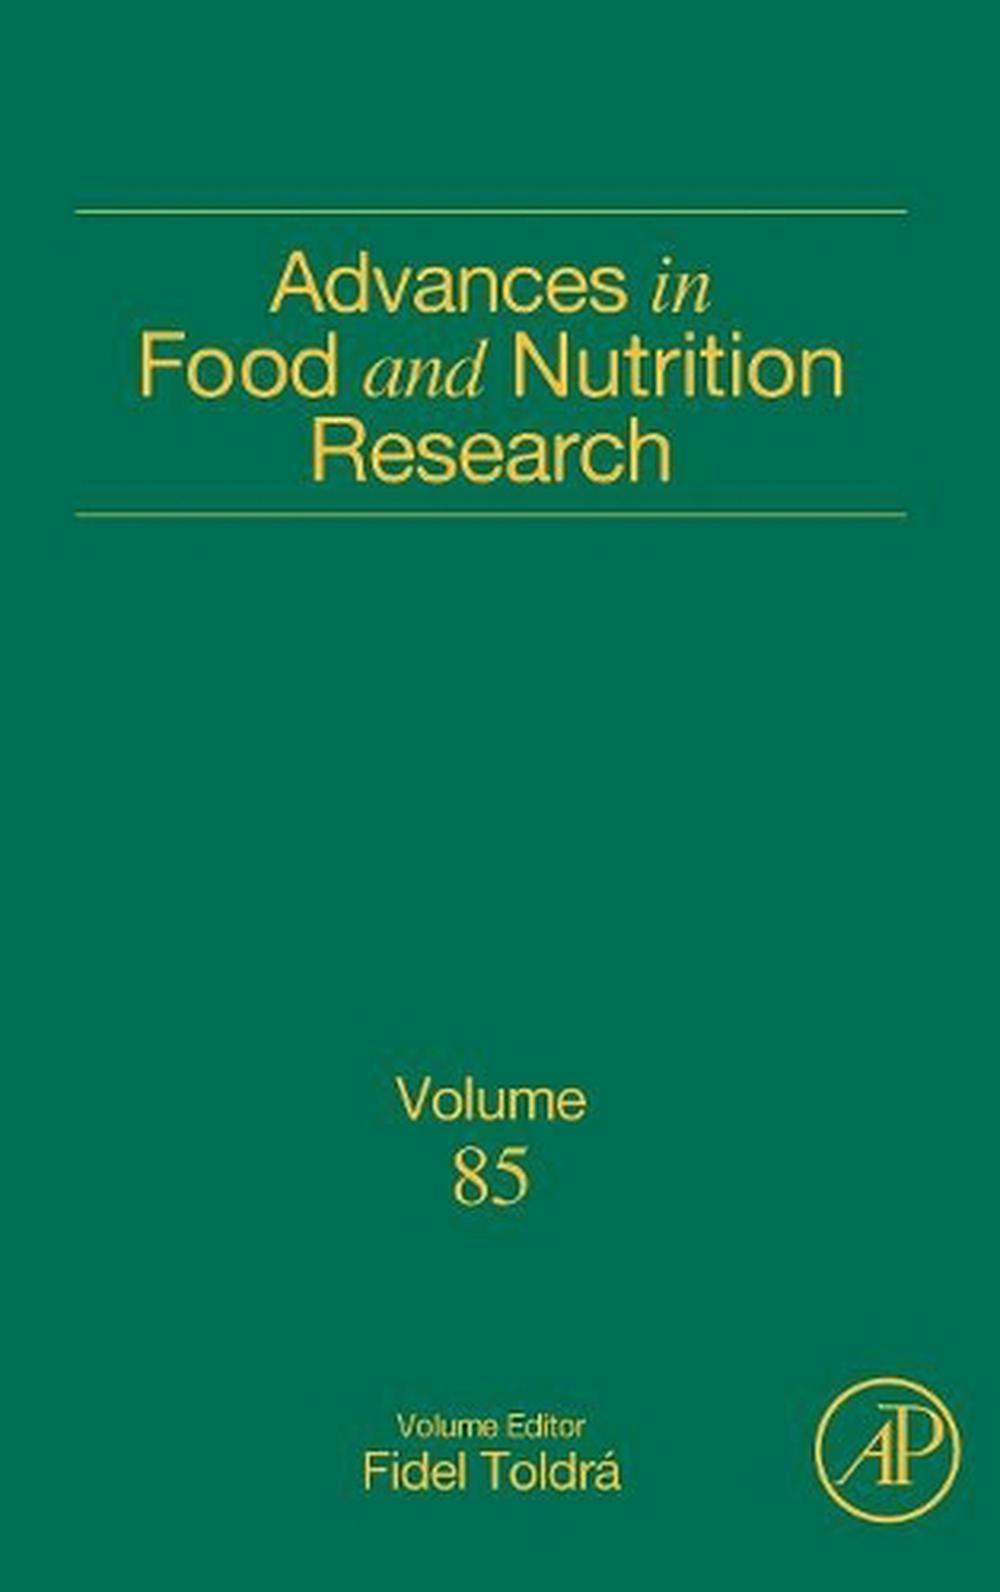 best title for research about food